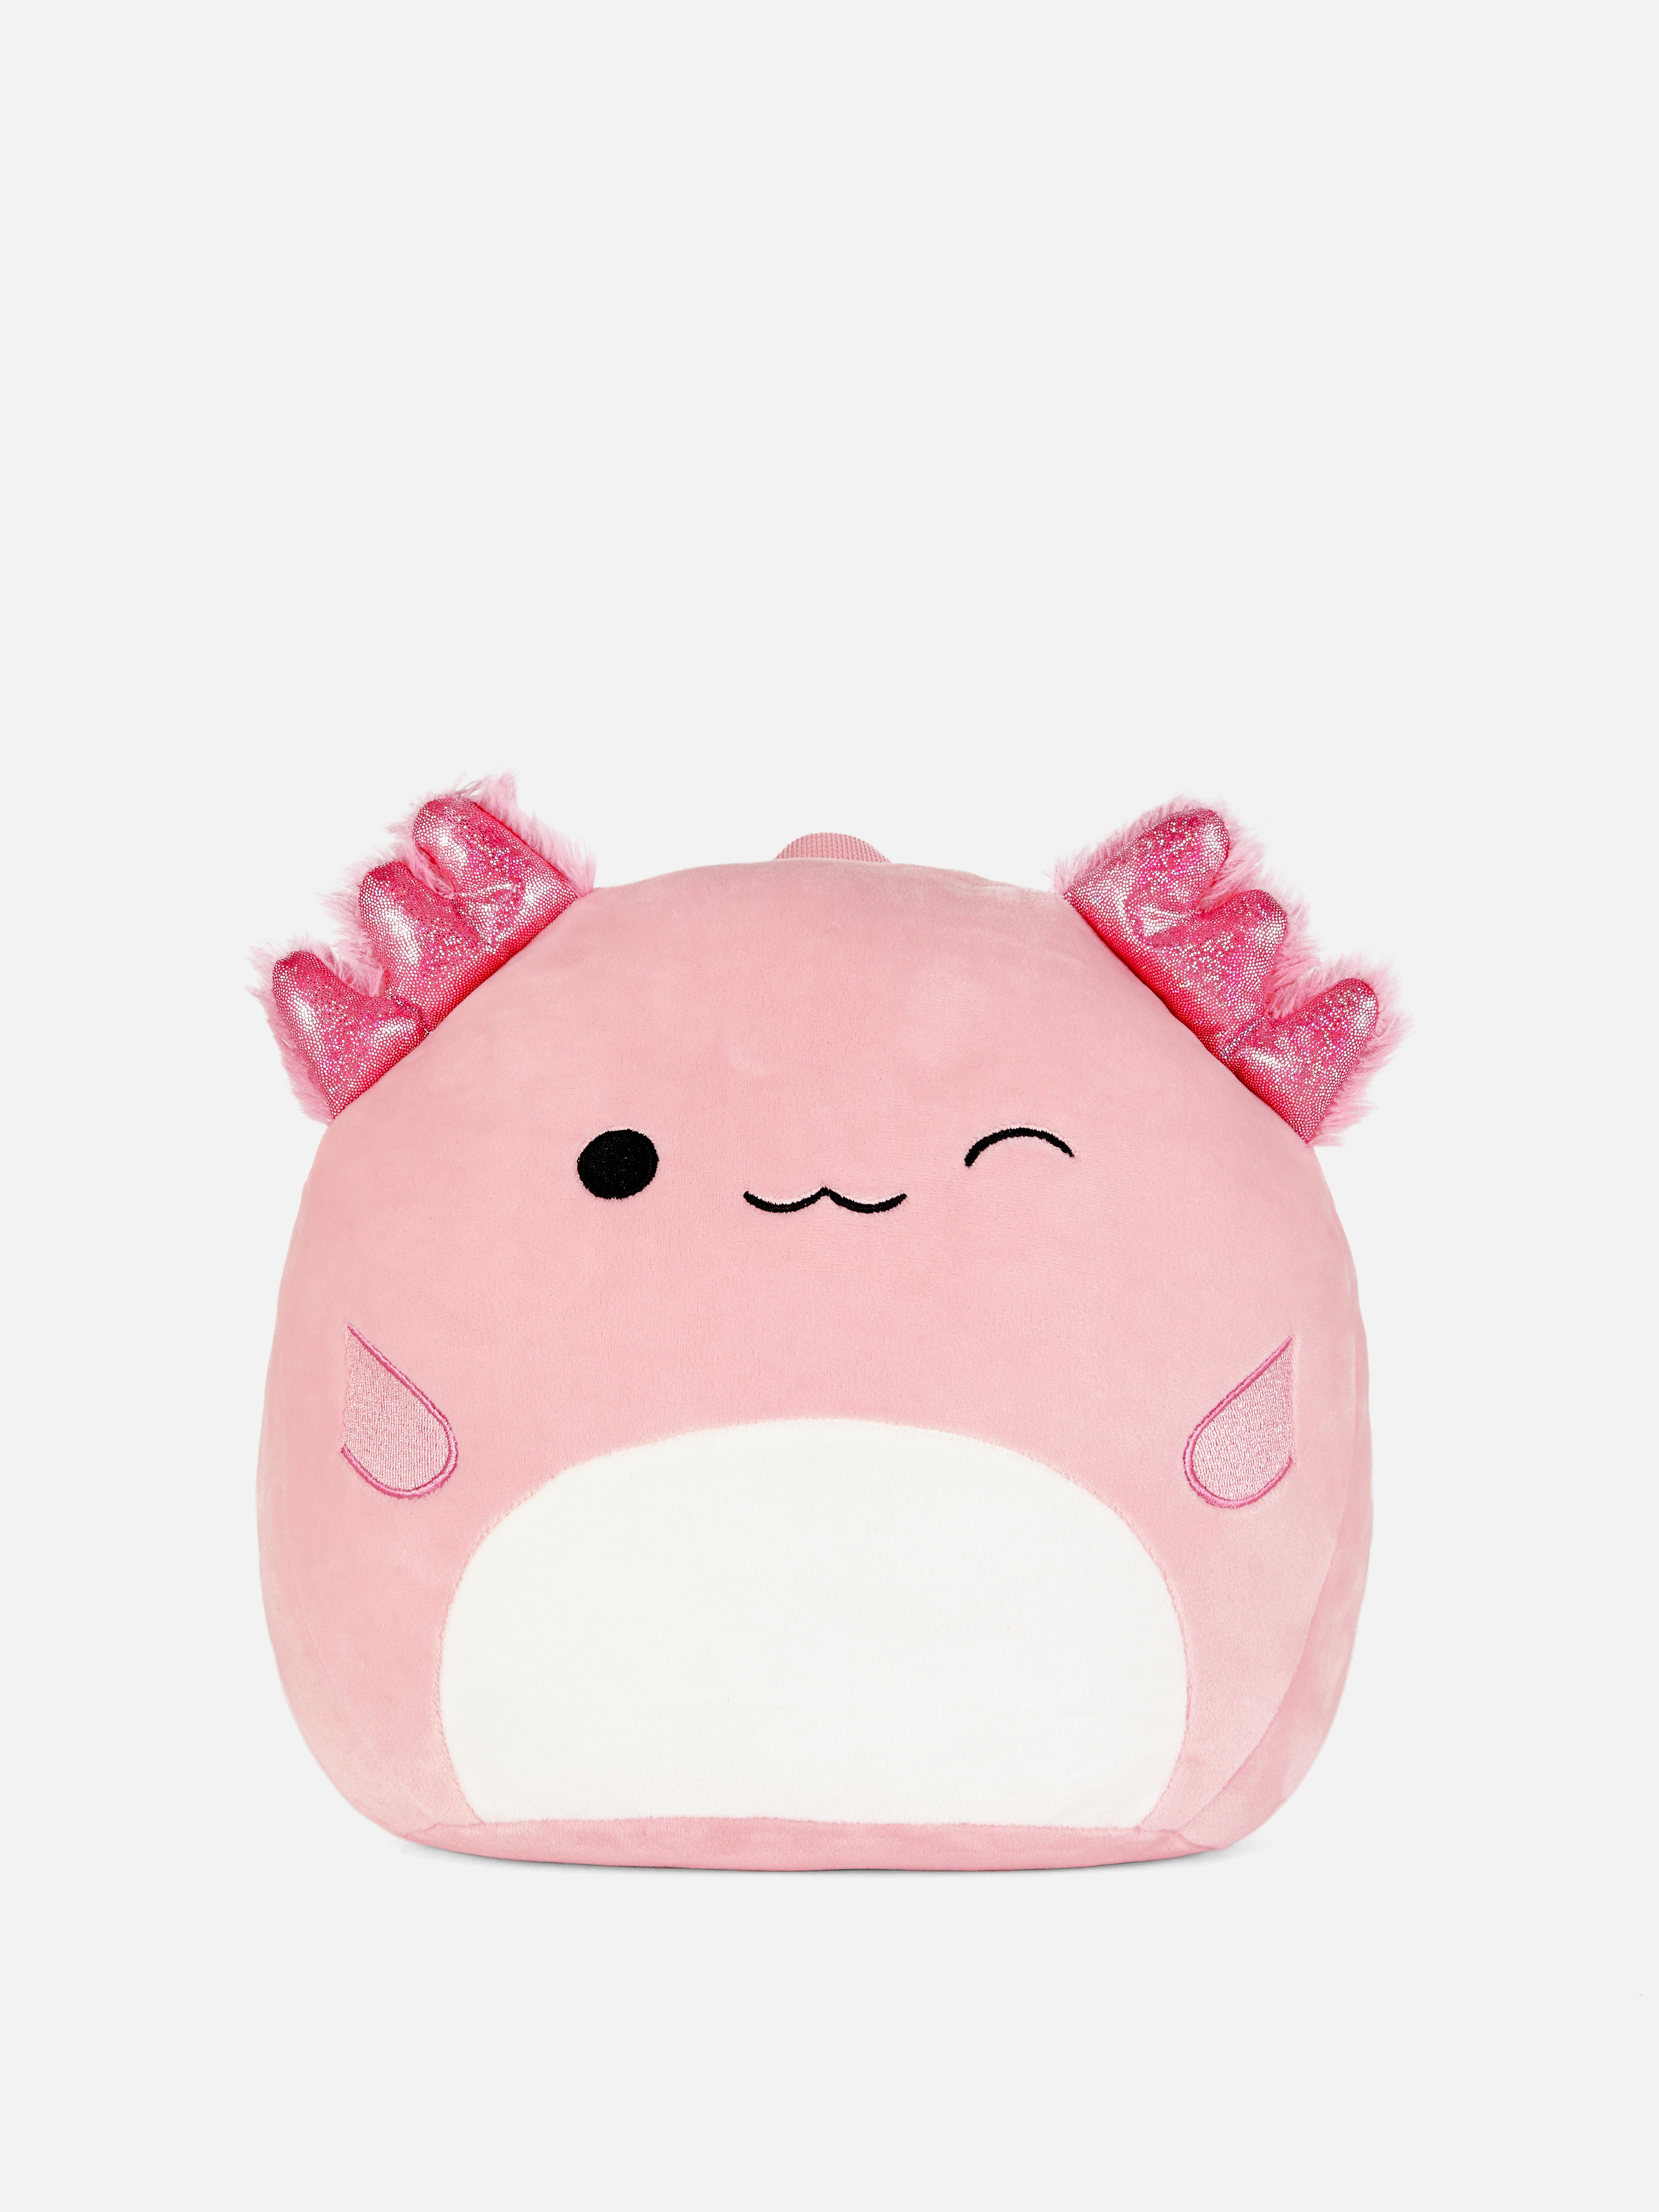 Squishmallows Plush Backpack